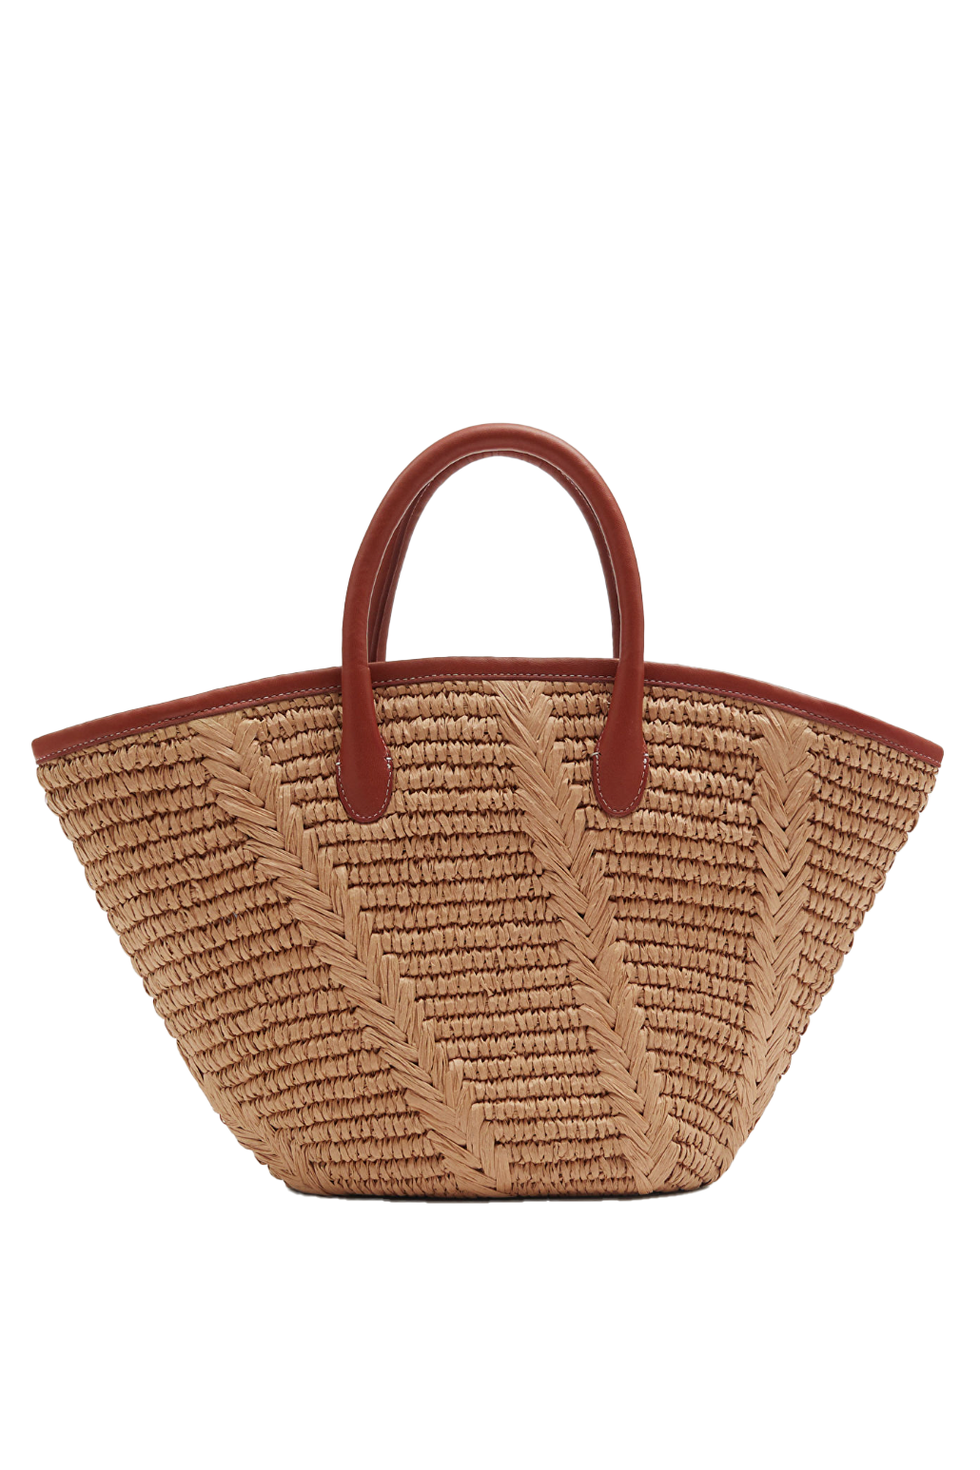 &Other Stories Leather-Trimmed Straw Tote